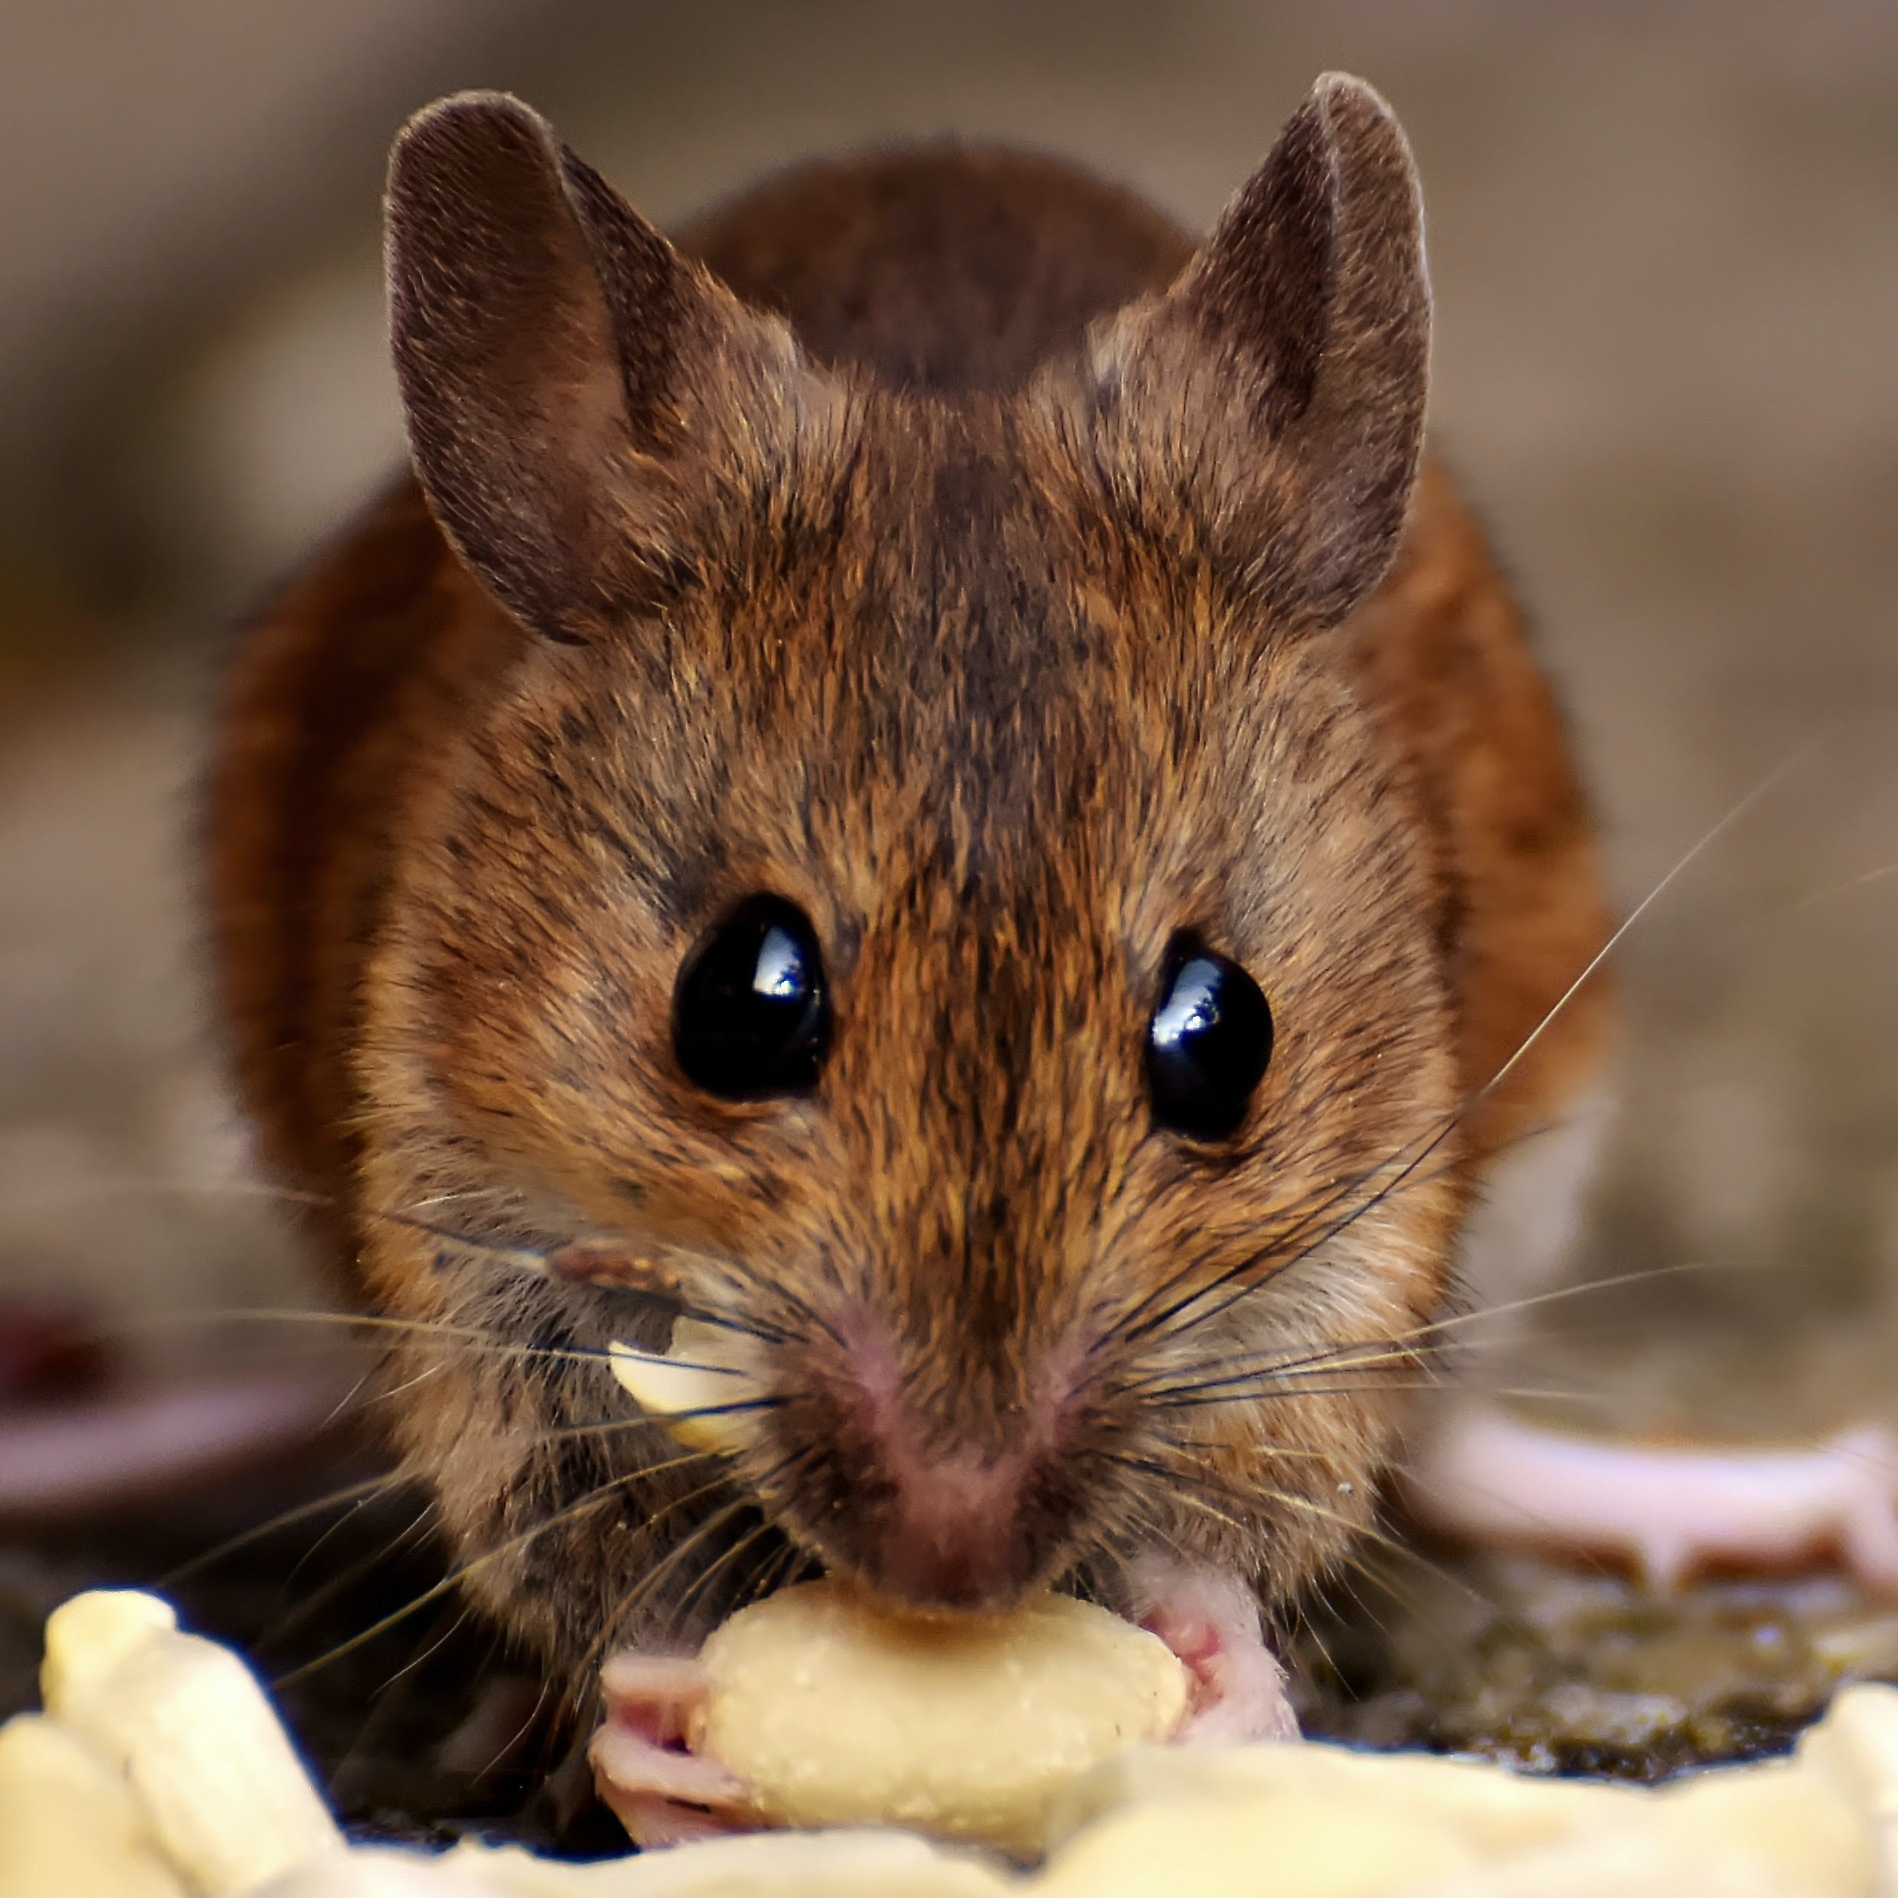 house mice can spread disease and illness